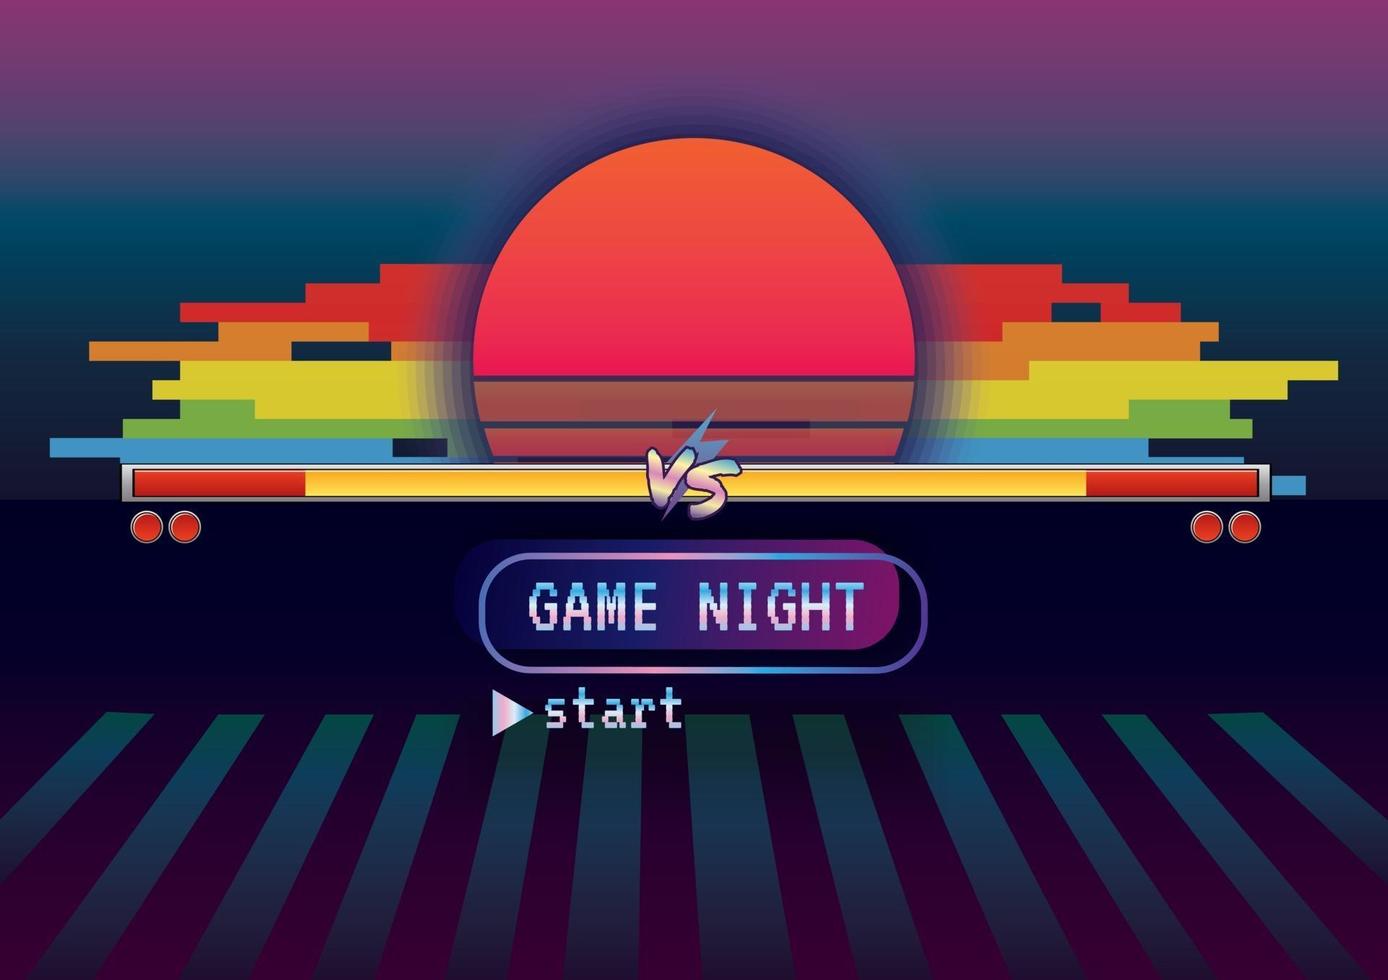 Gaming night VS zone game icon background vector